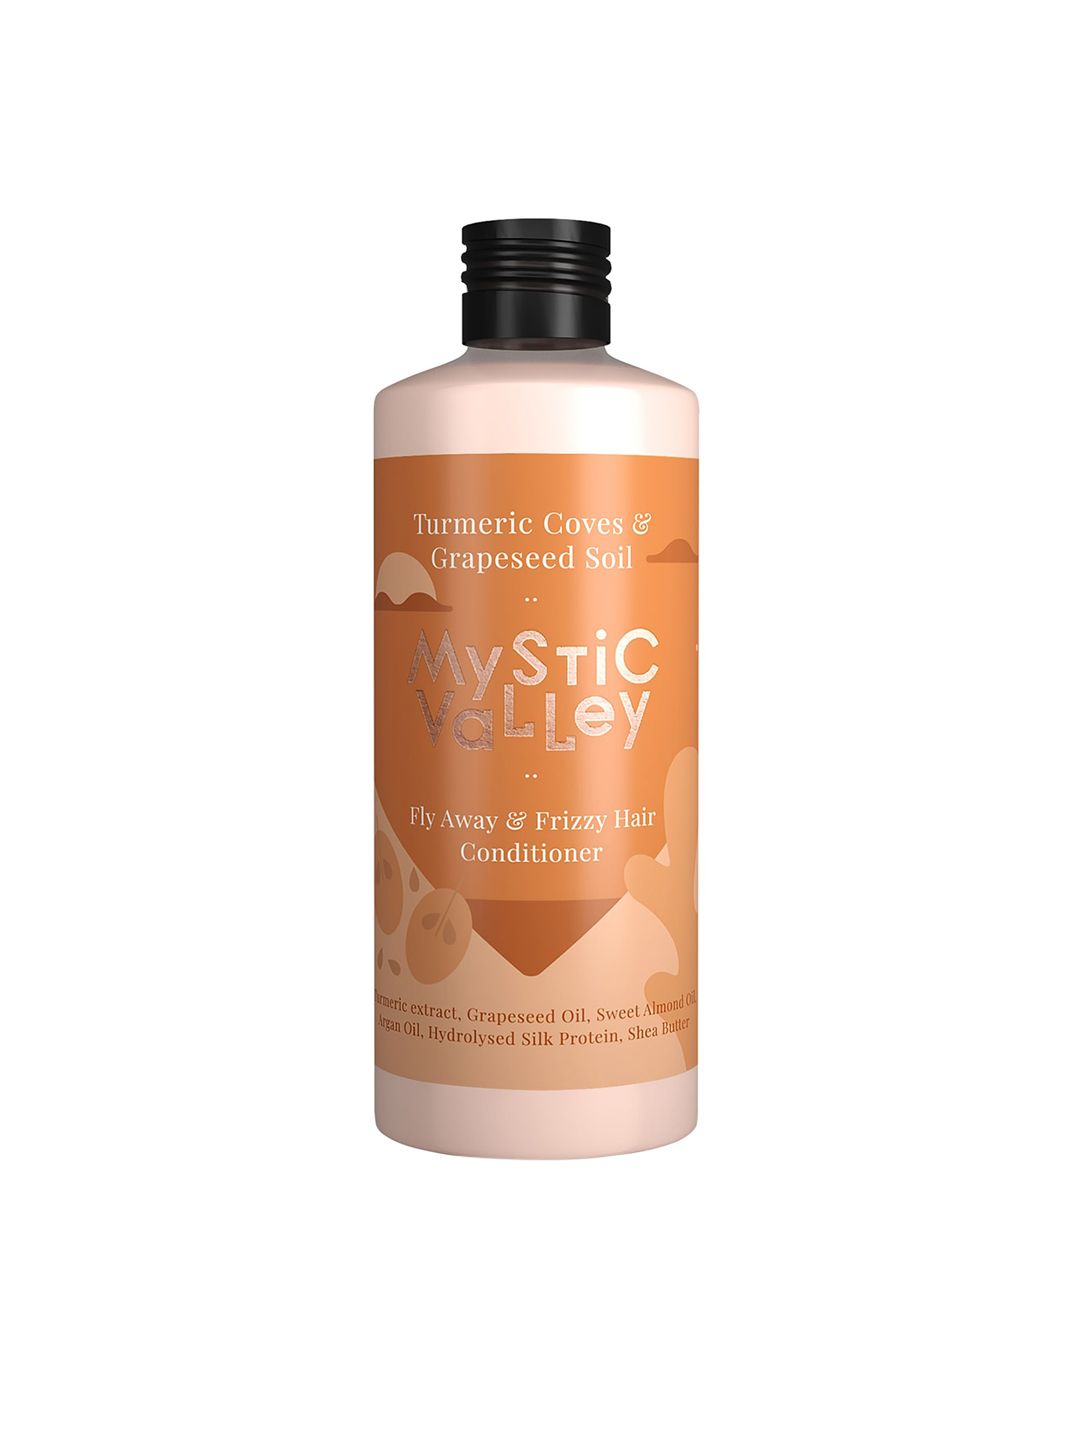 MYSTIC VALLEY Turmeric Cove & Grapeseed Soil Fly Away & Frizzy Hair Conditioner 350 ml Price in India